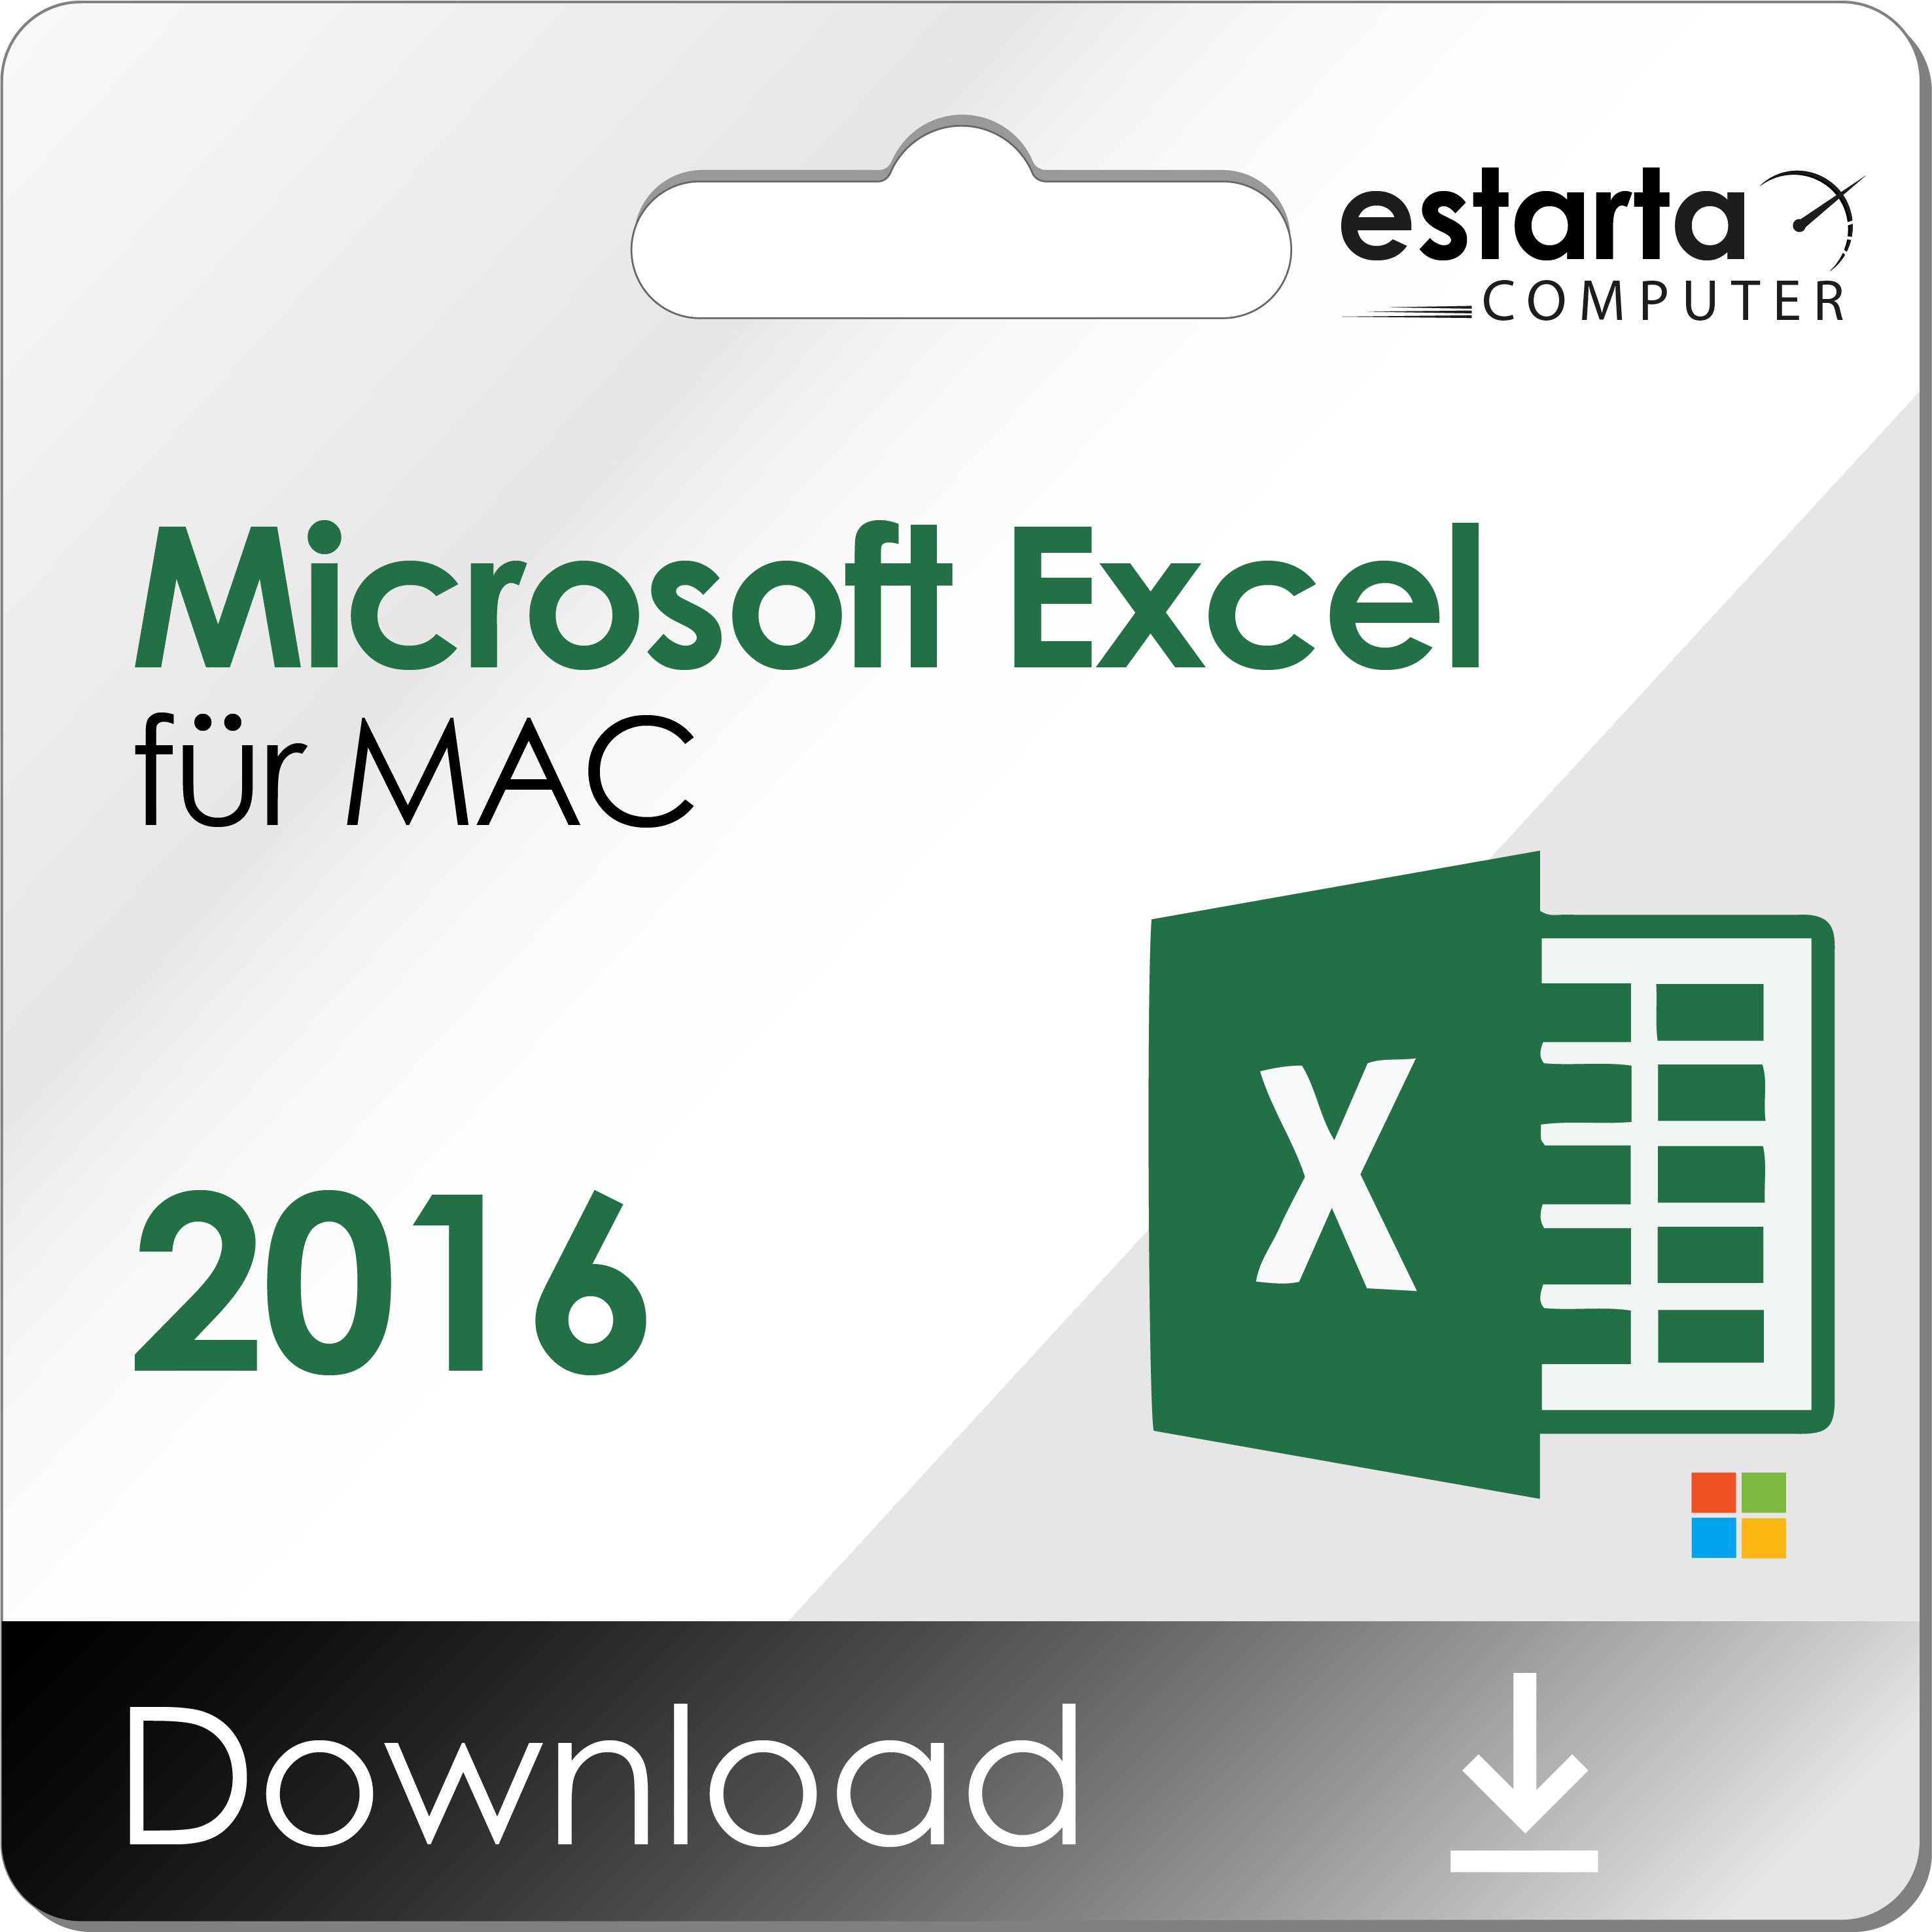 Microsoft Excel for Mac 2016